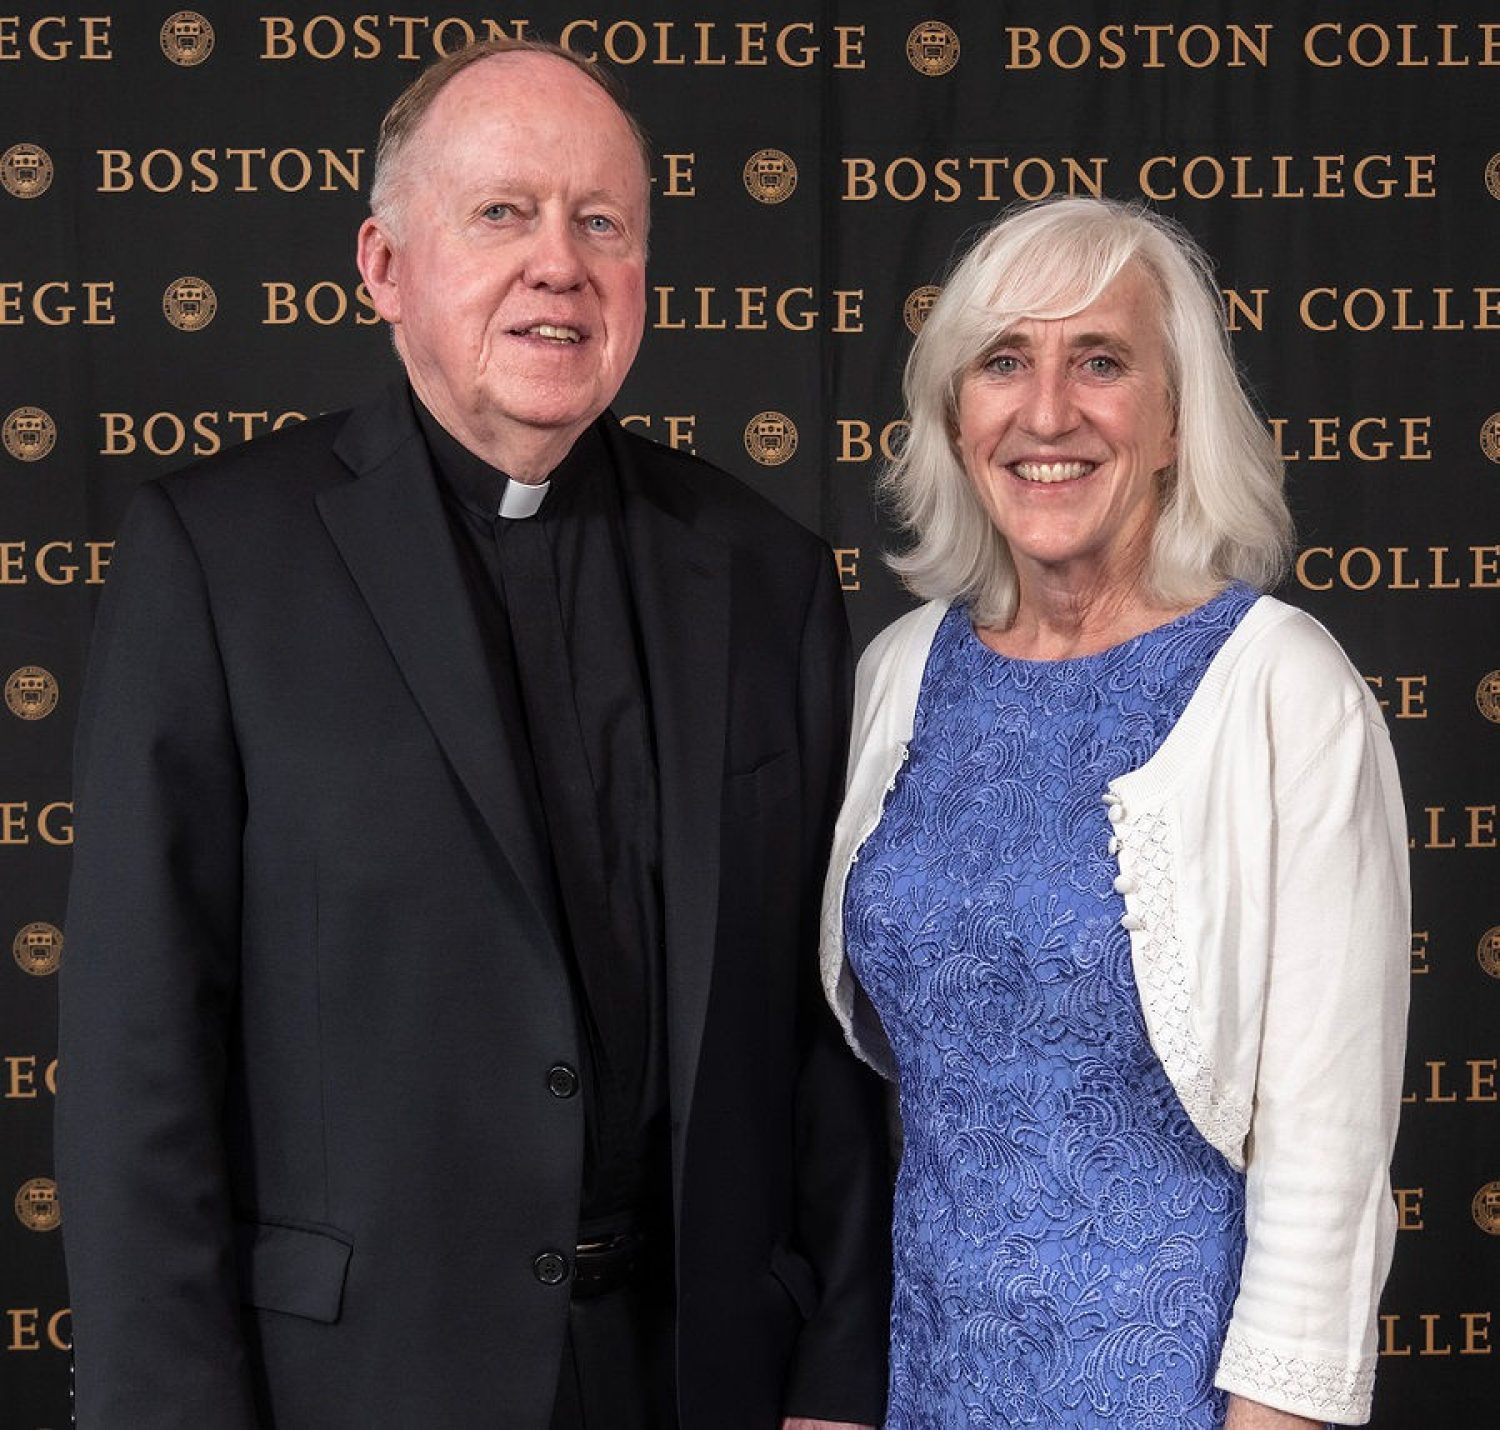 University President William P. Leahy, S.J. and Colleen Simonelli